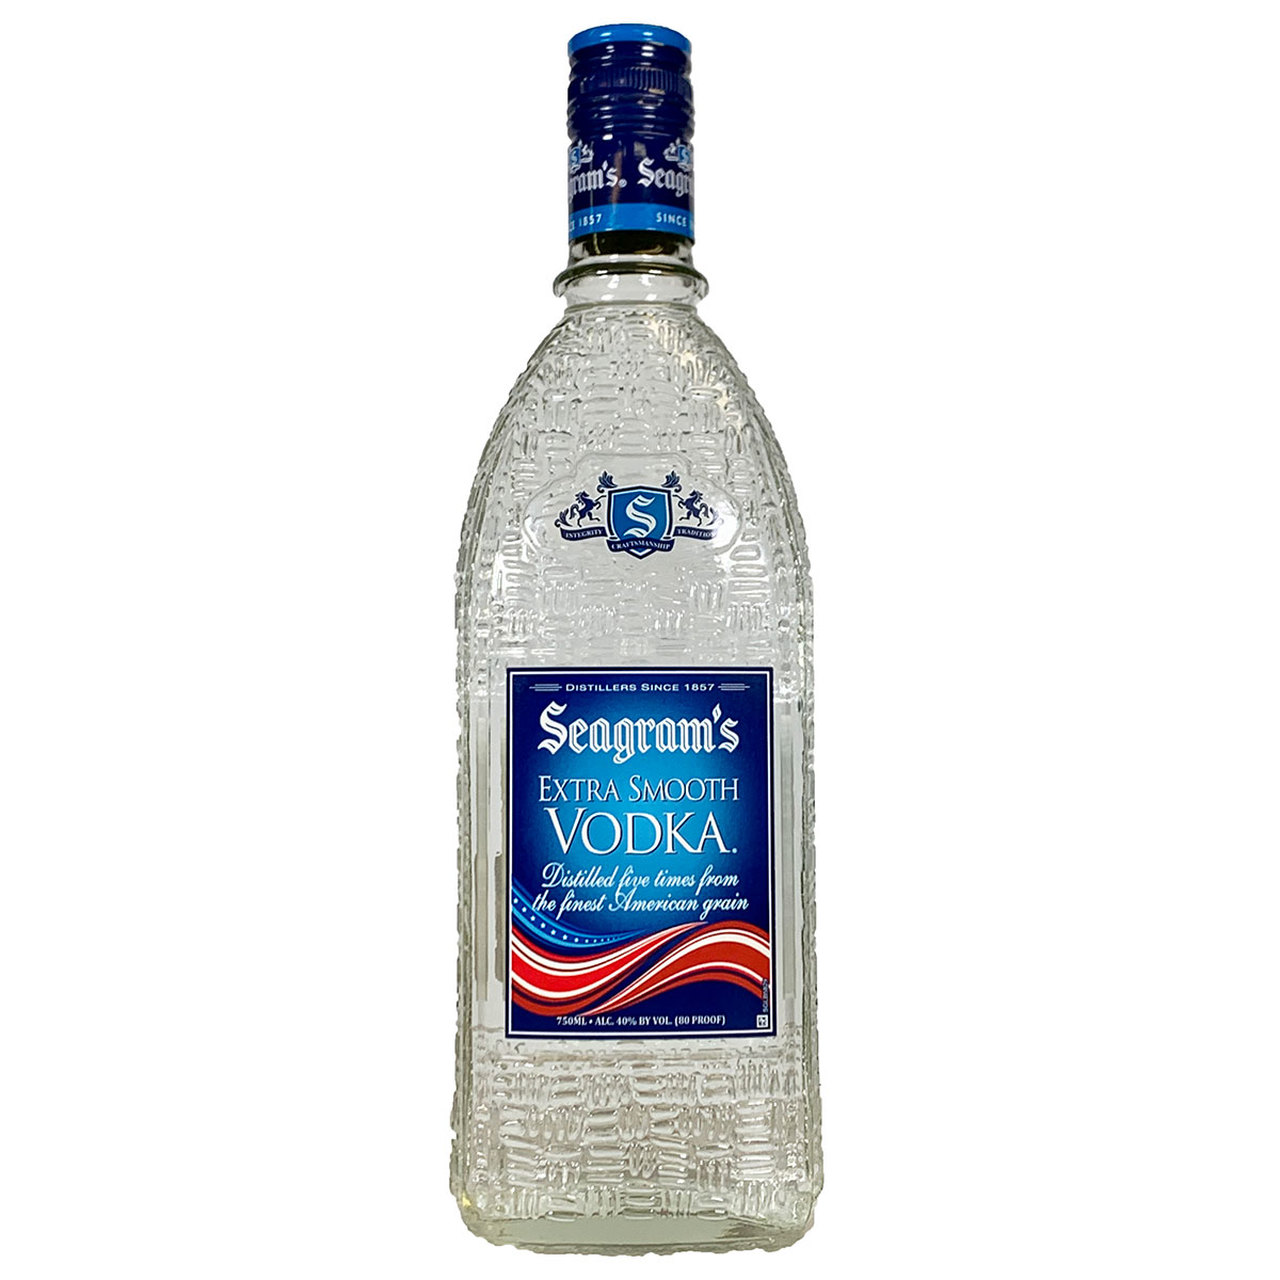 SEAGRAMS EXTRA SMOOTH VODKA Water Street Wines Spirits